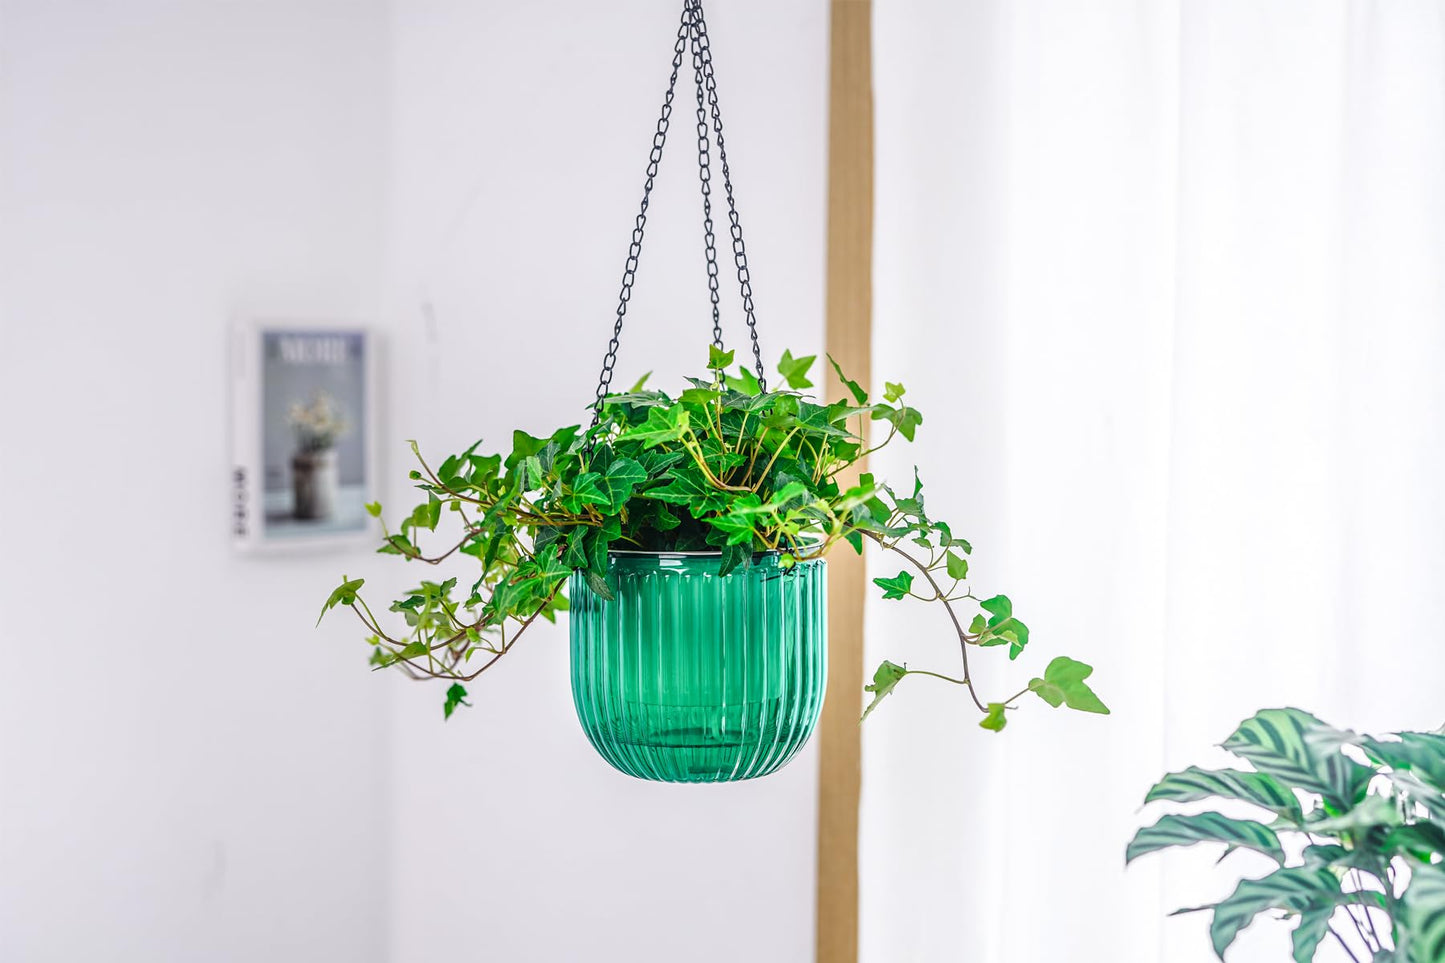 Melphoe 2 Pack Self Watering Hanging Planters Indoor Flower Pots, 6.5 Inch Outdoor Hanging Basket, Plant Hanger with 3Hooks Drainage Holes for Garden Home (Emerald)